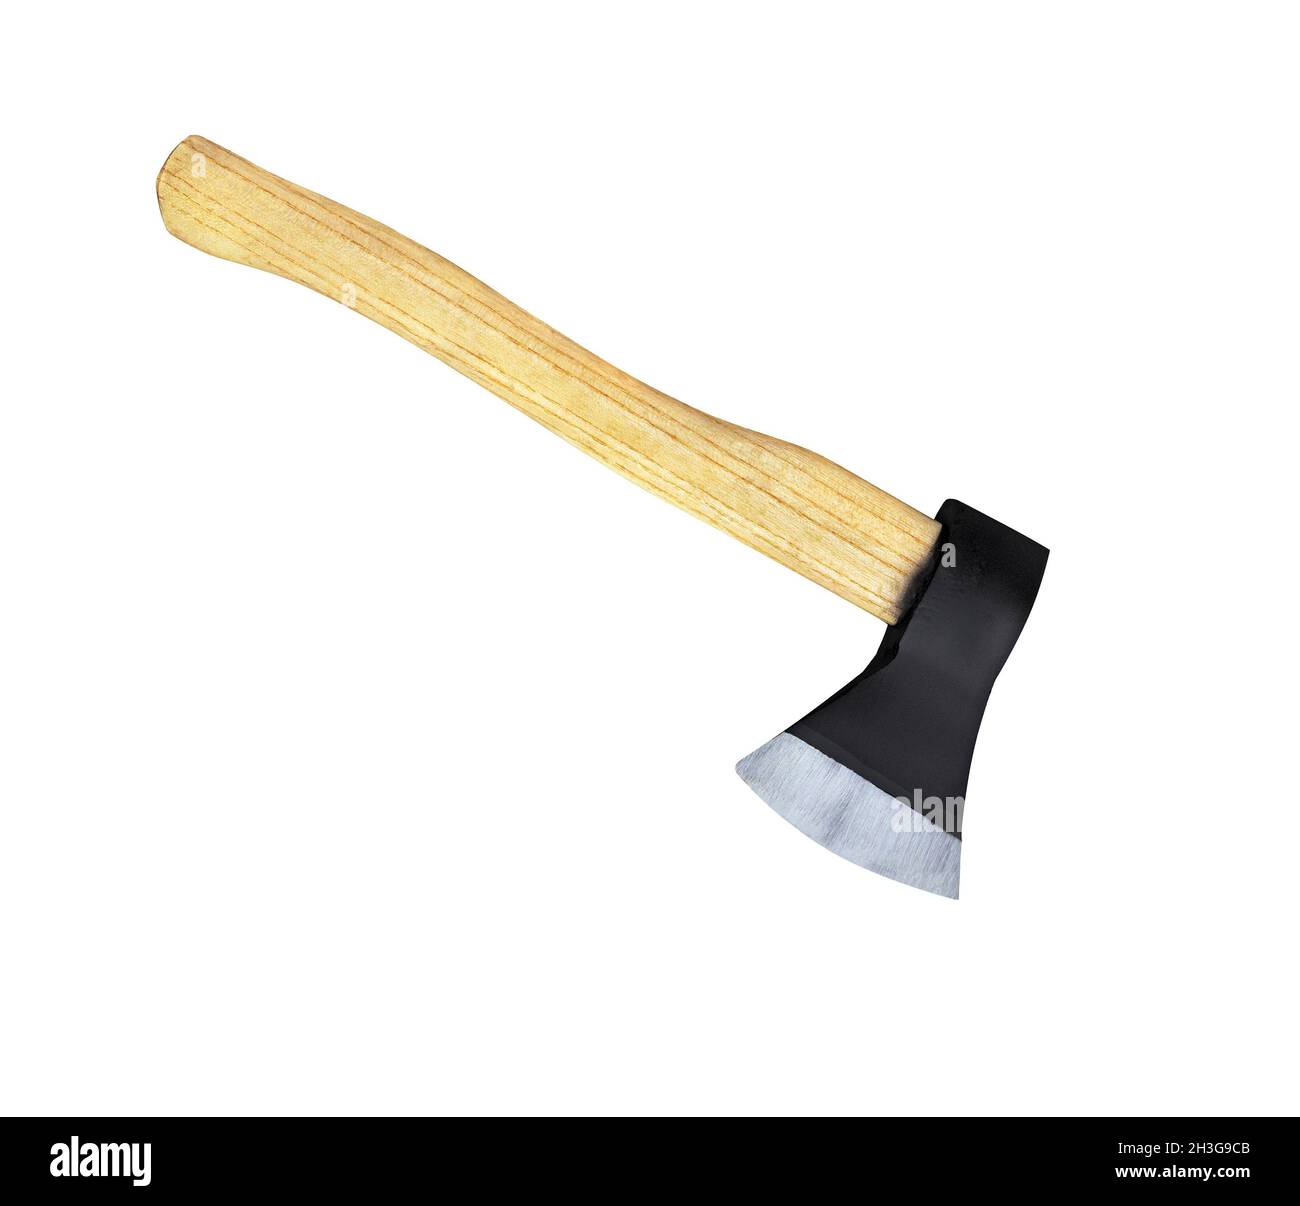 Hatchet or Axe with wooden handle isolated on white background Stock Photo